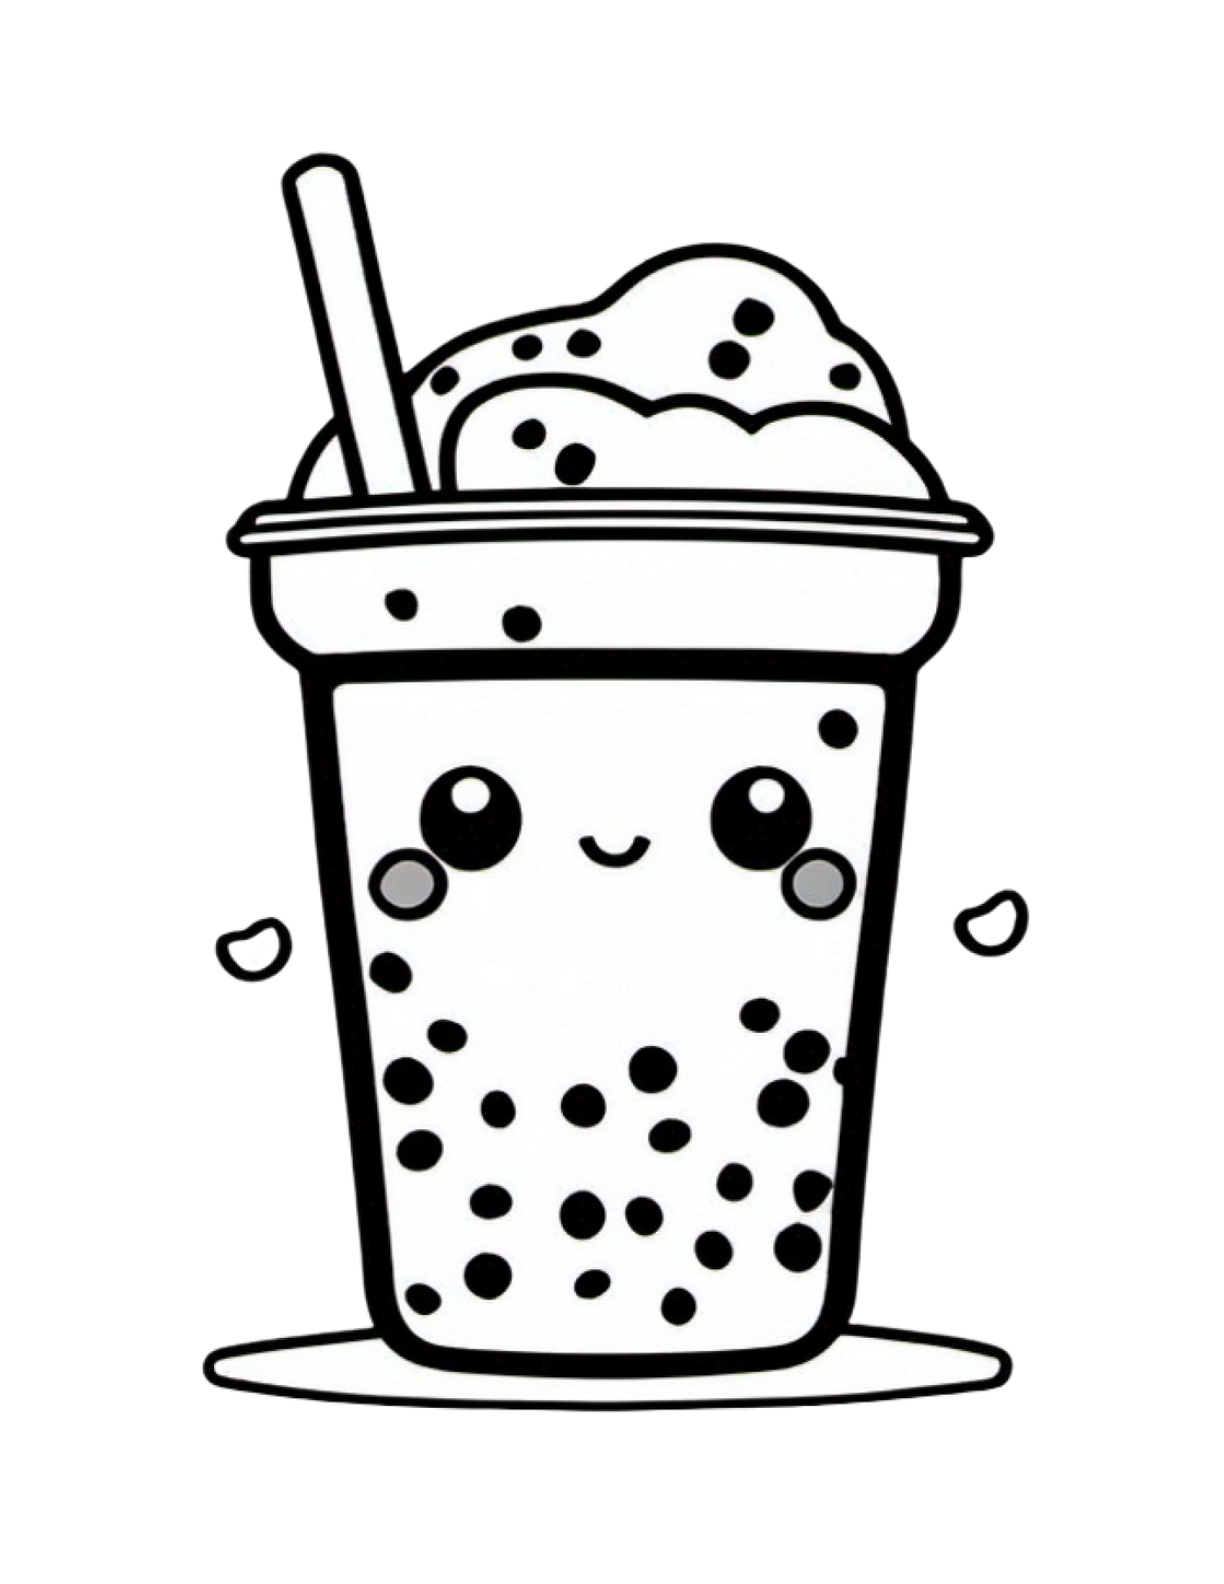 Boba coloring pages